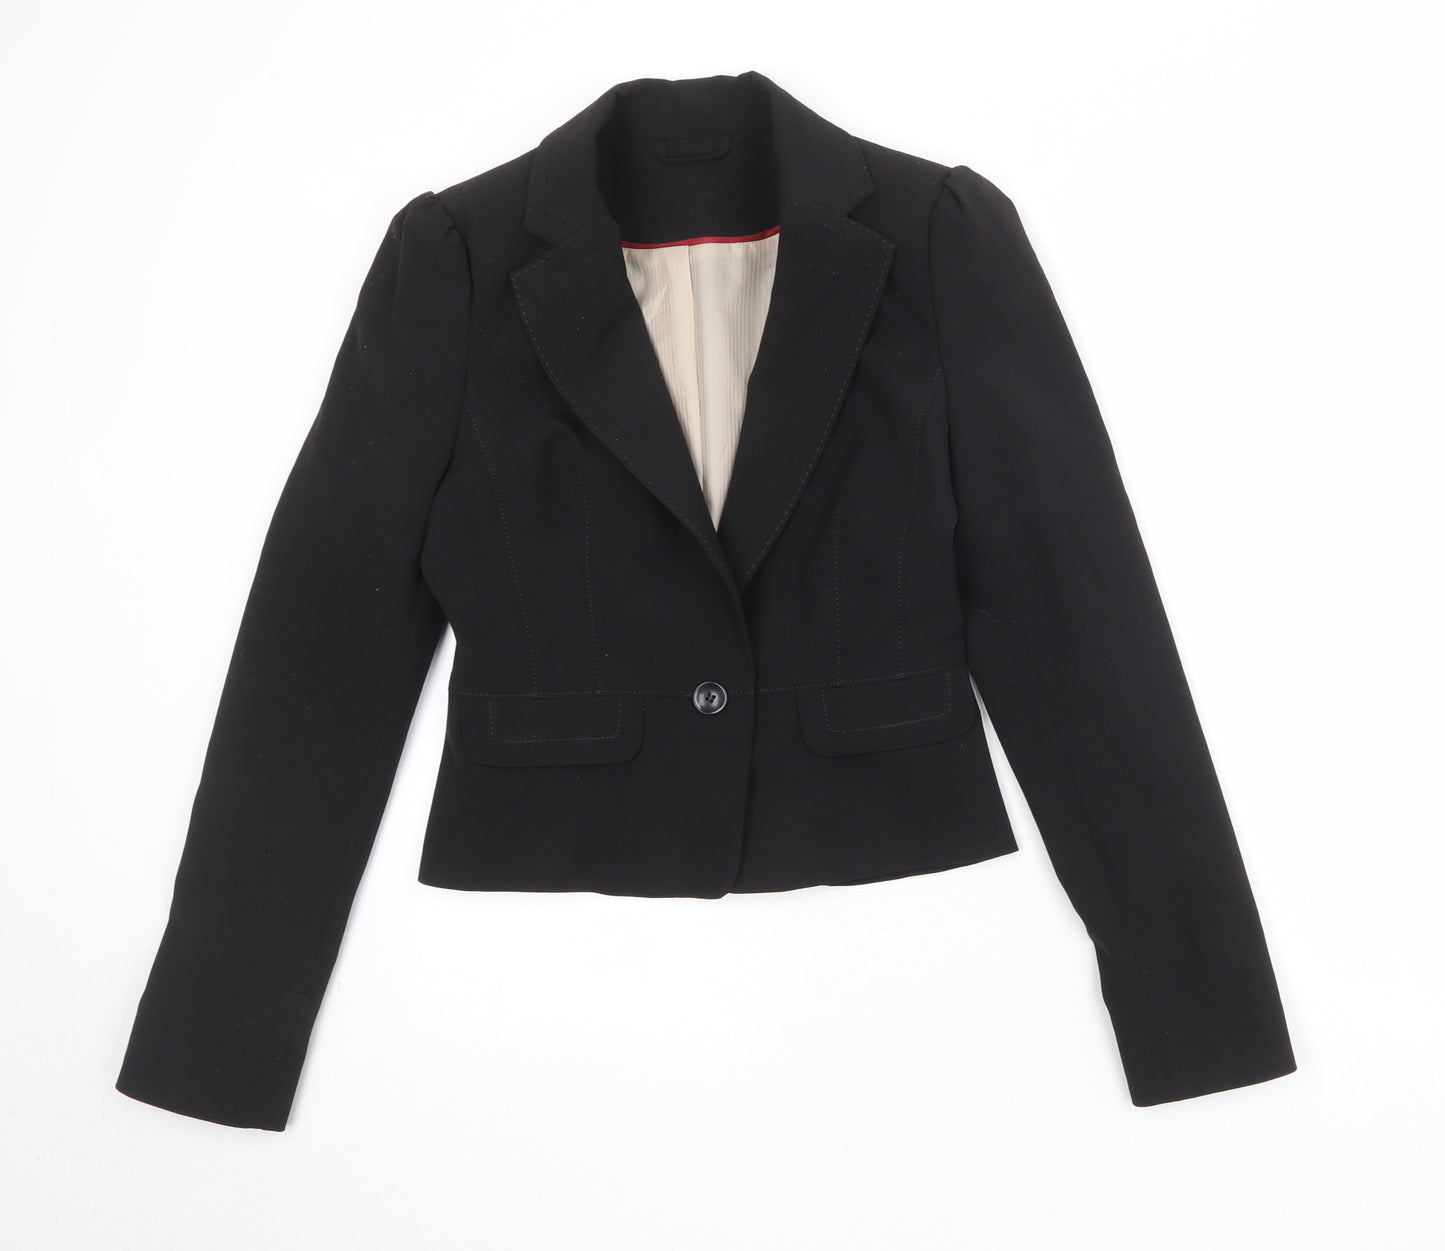 New Look Womens Black Polyester Jacket Suit Jacket Size 10